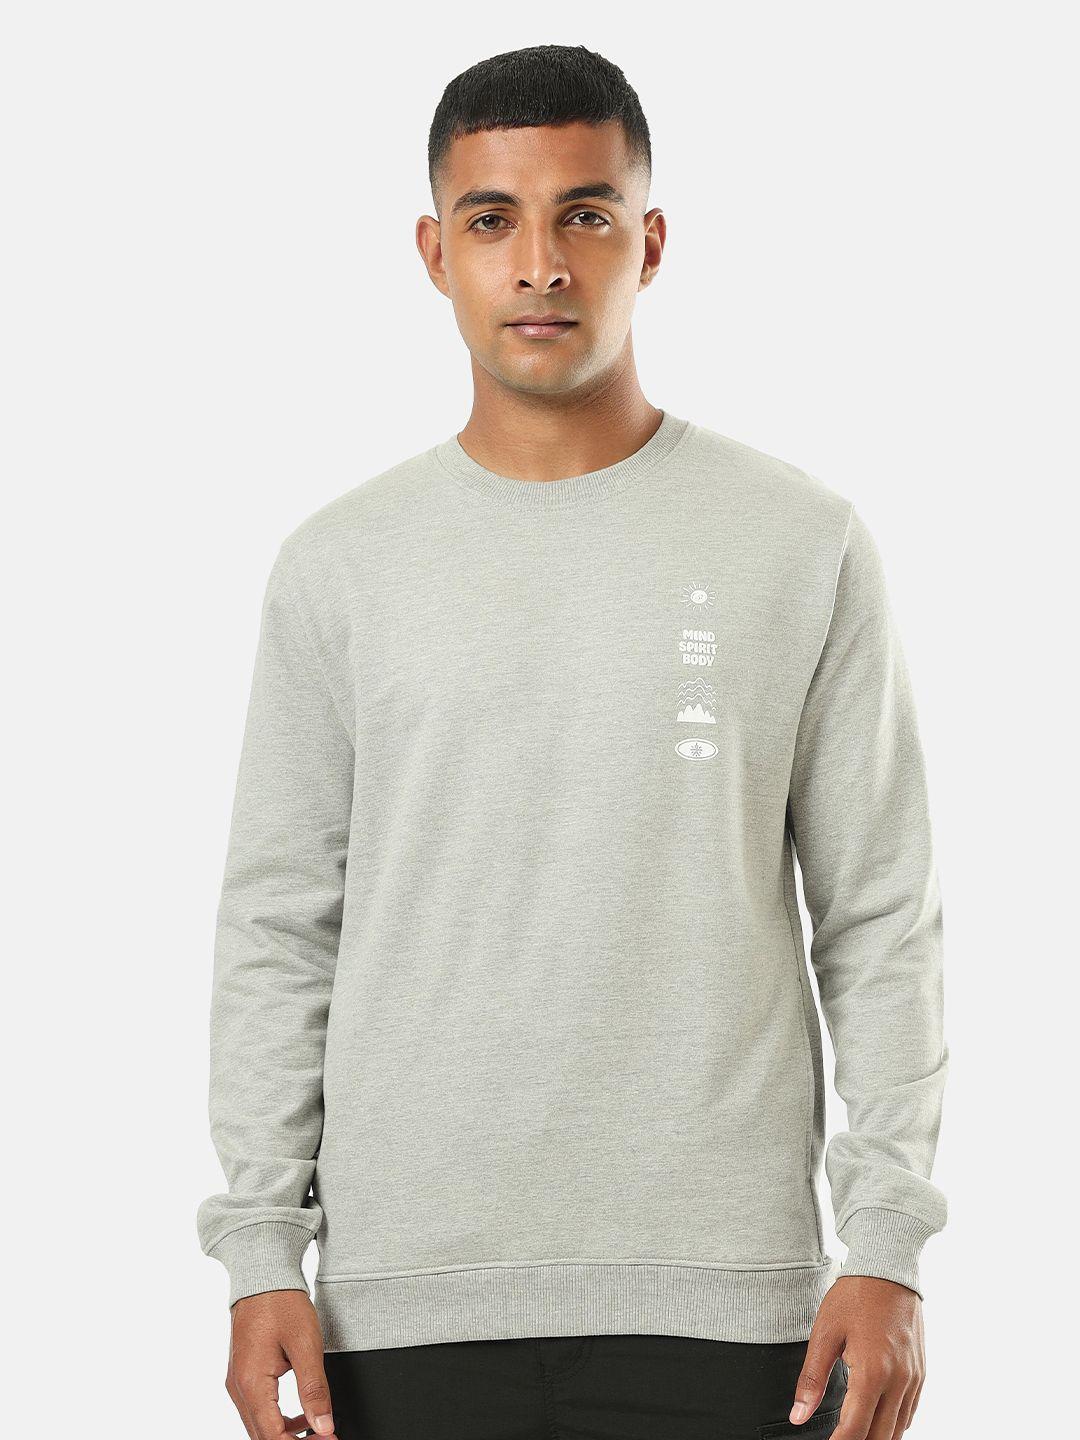 cultsport crew neck long sleeves sports pullover